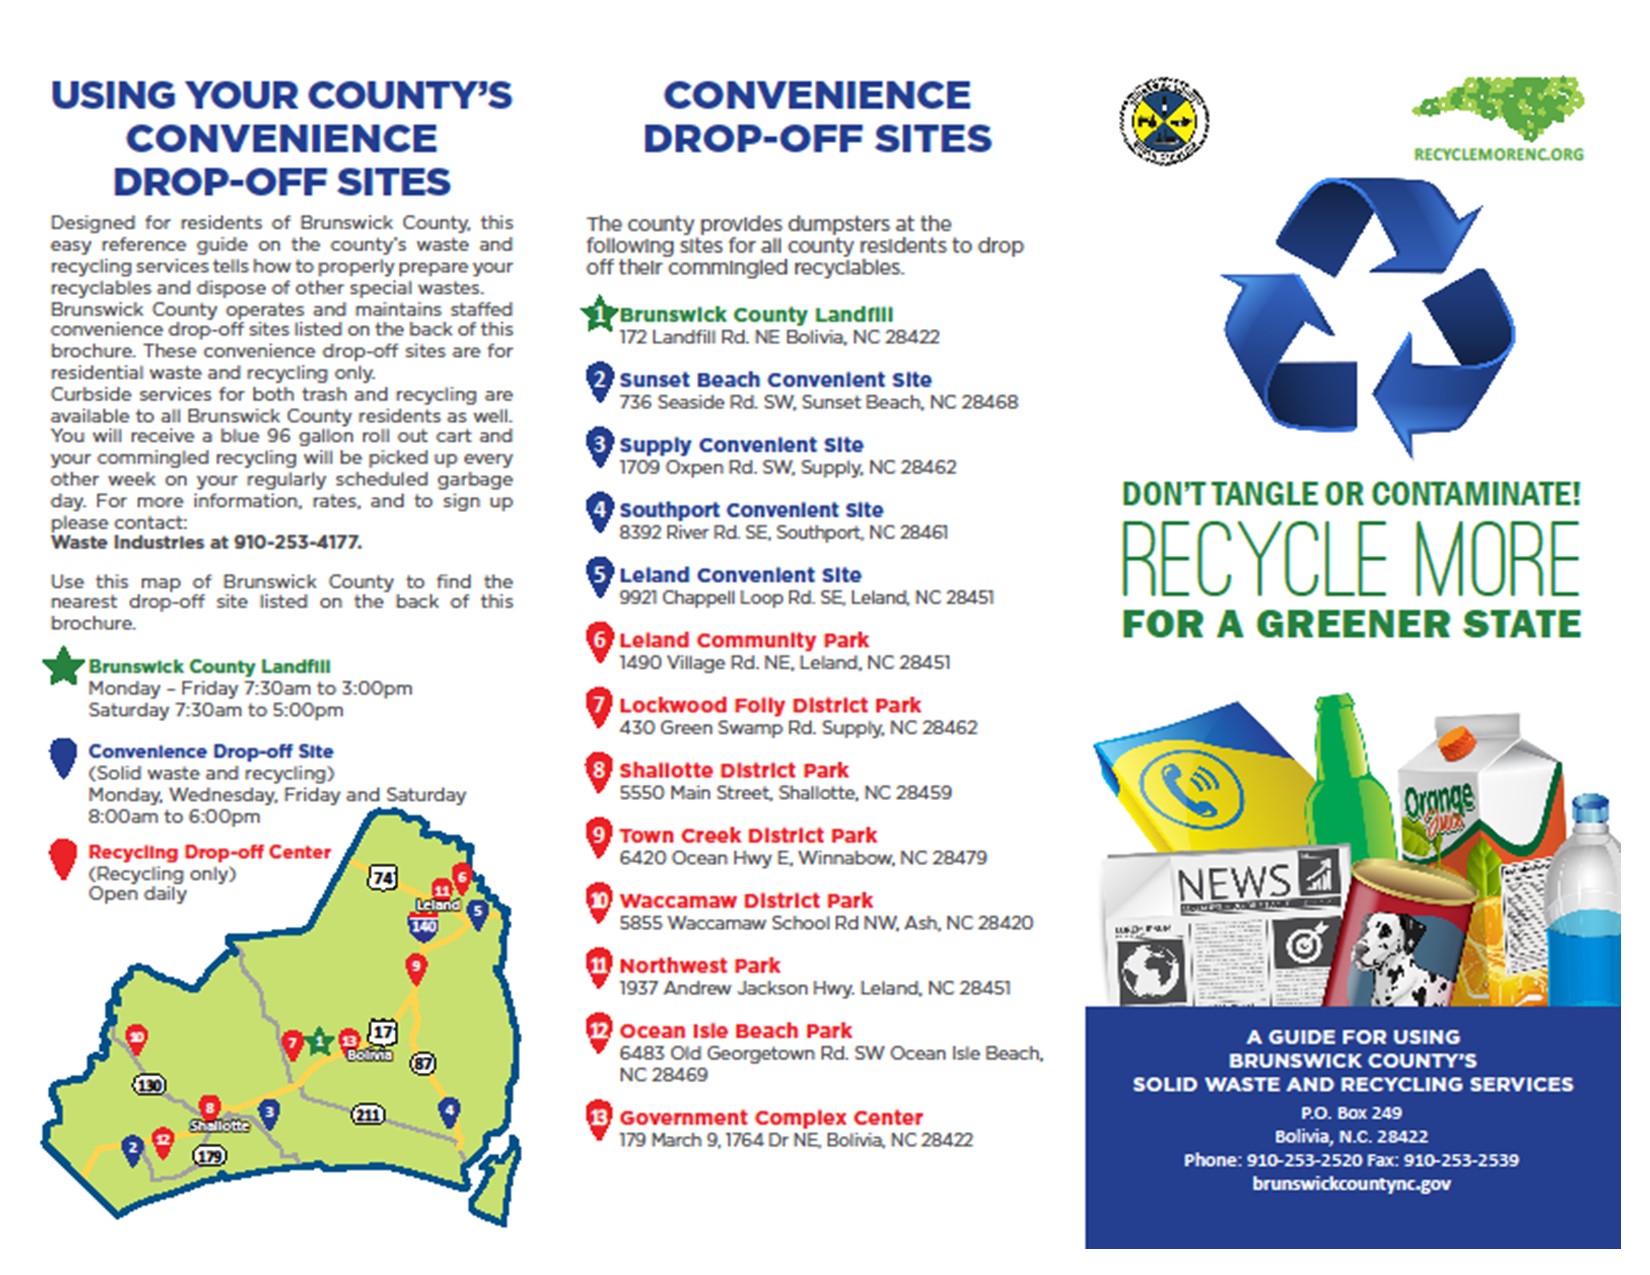 BC recycling guide